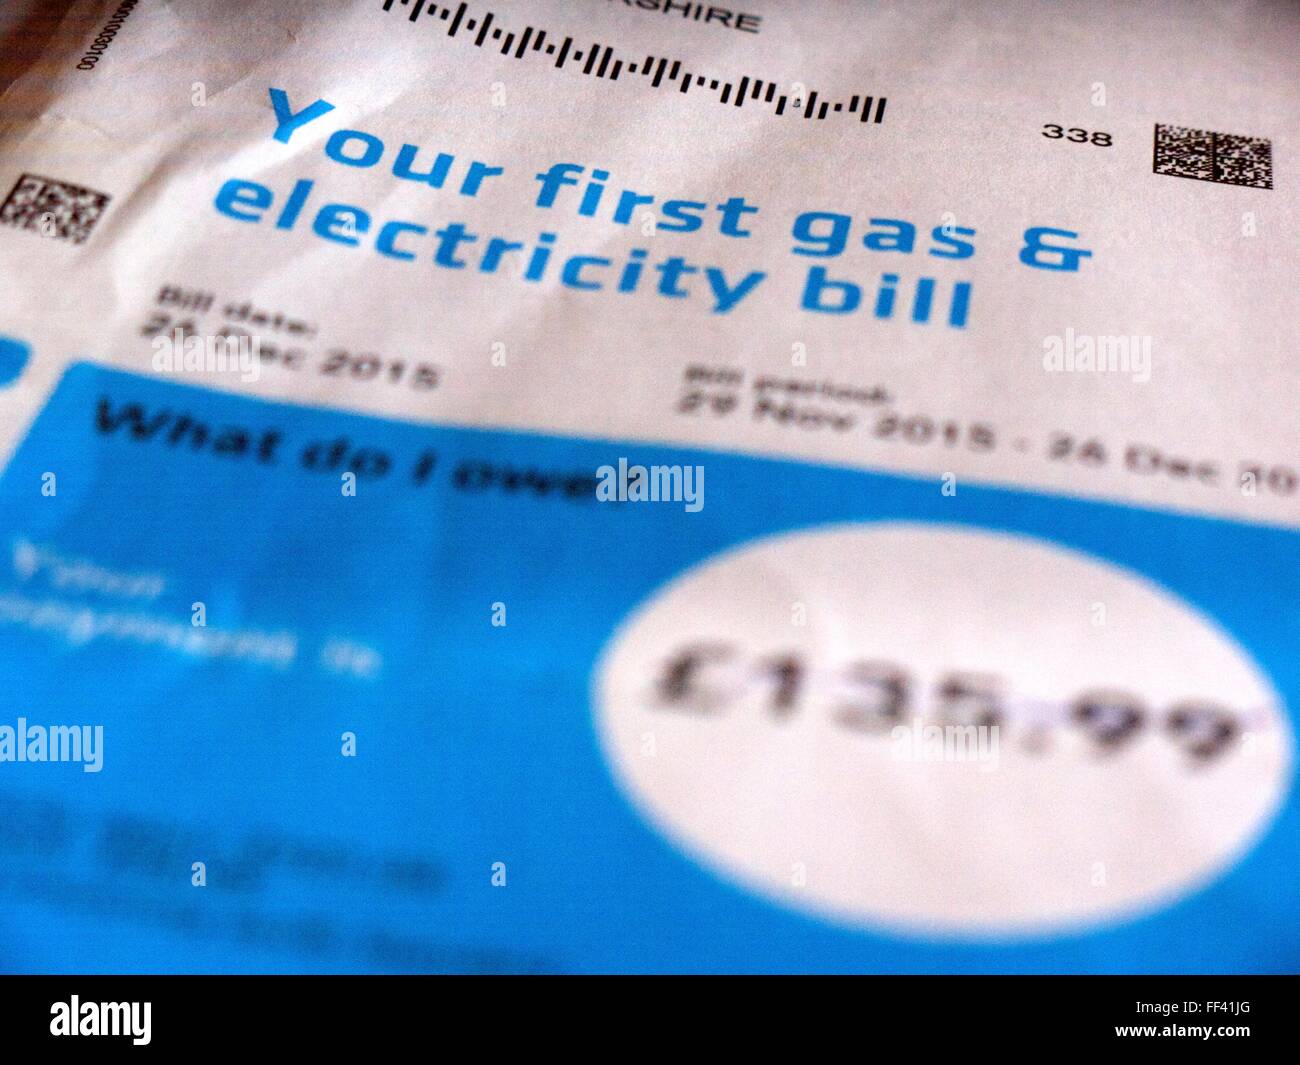 Gas and Electricity bill from British Gas Stock Photo